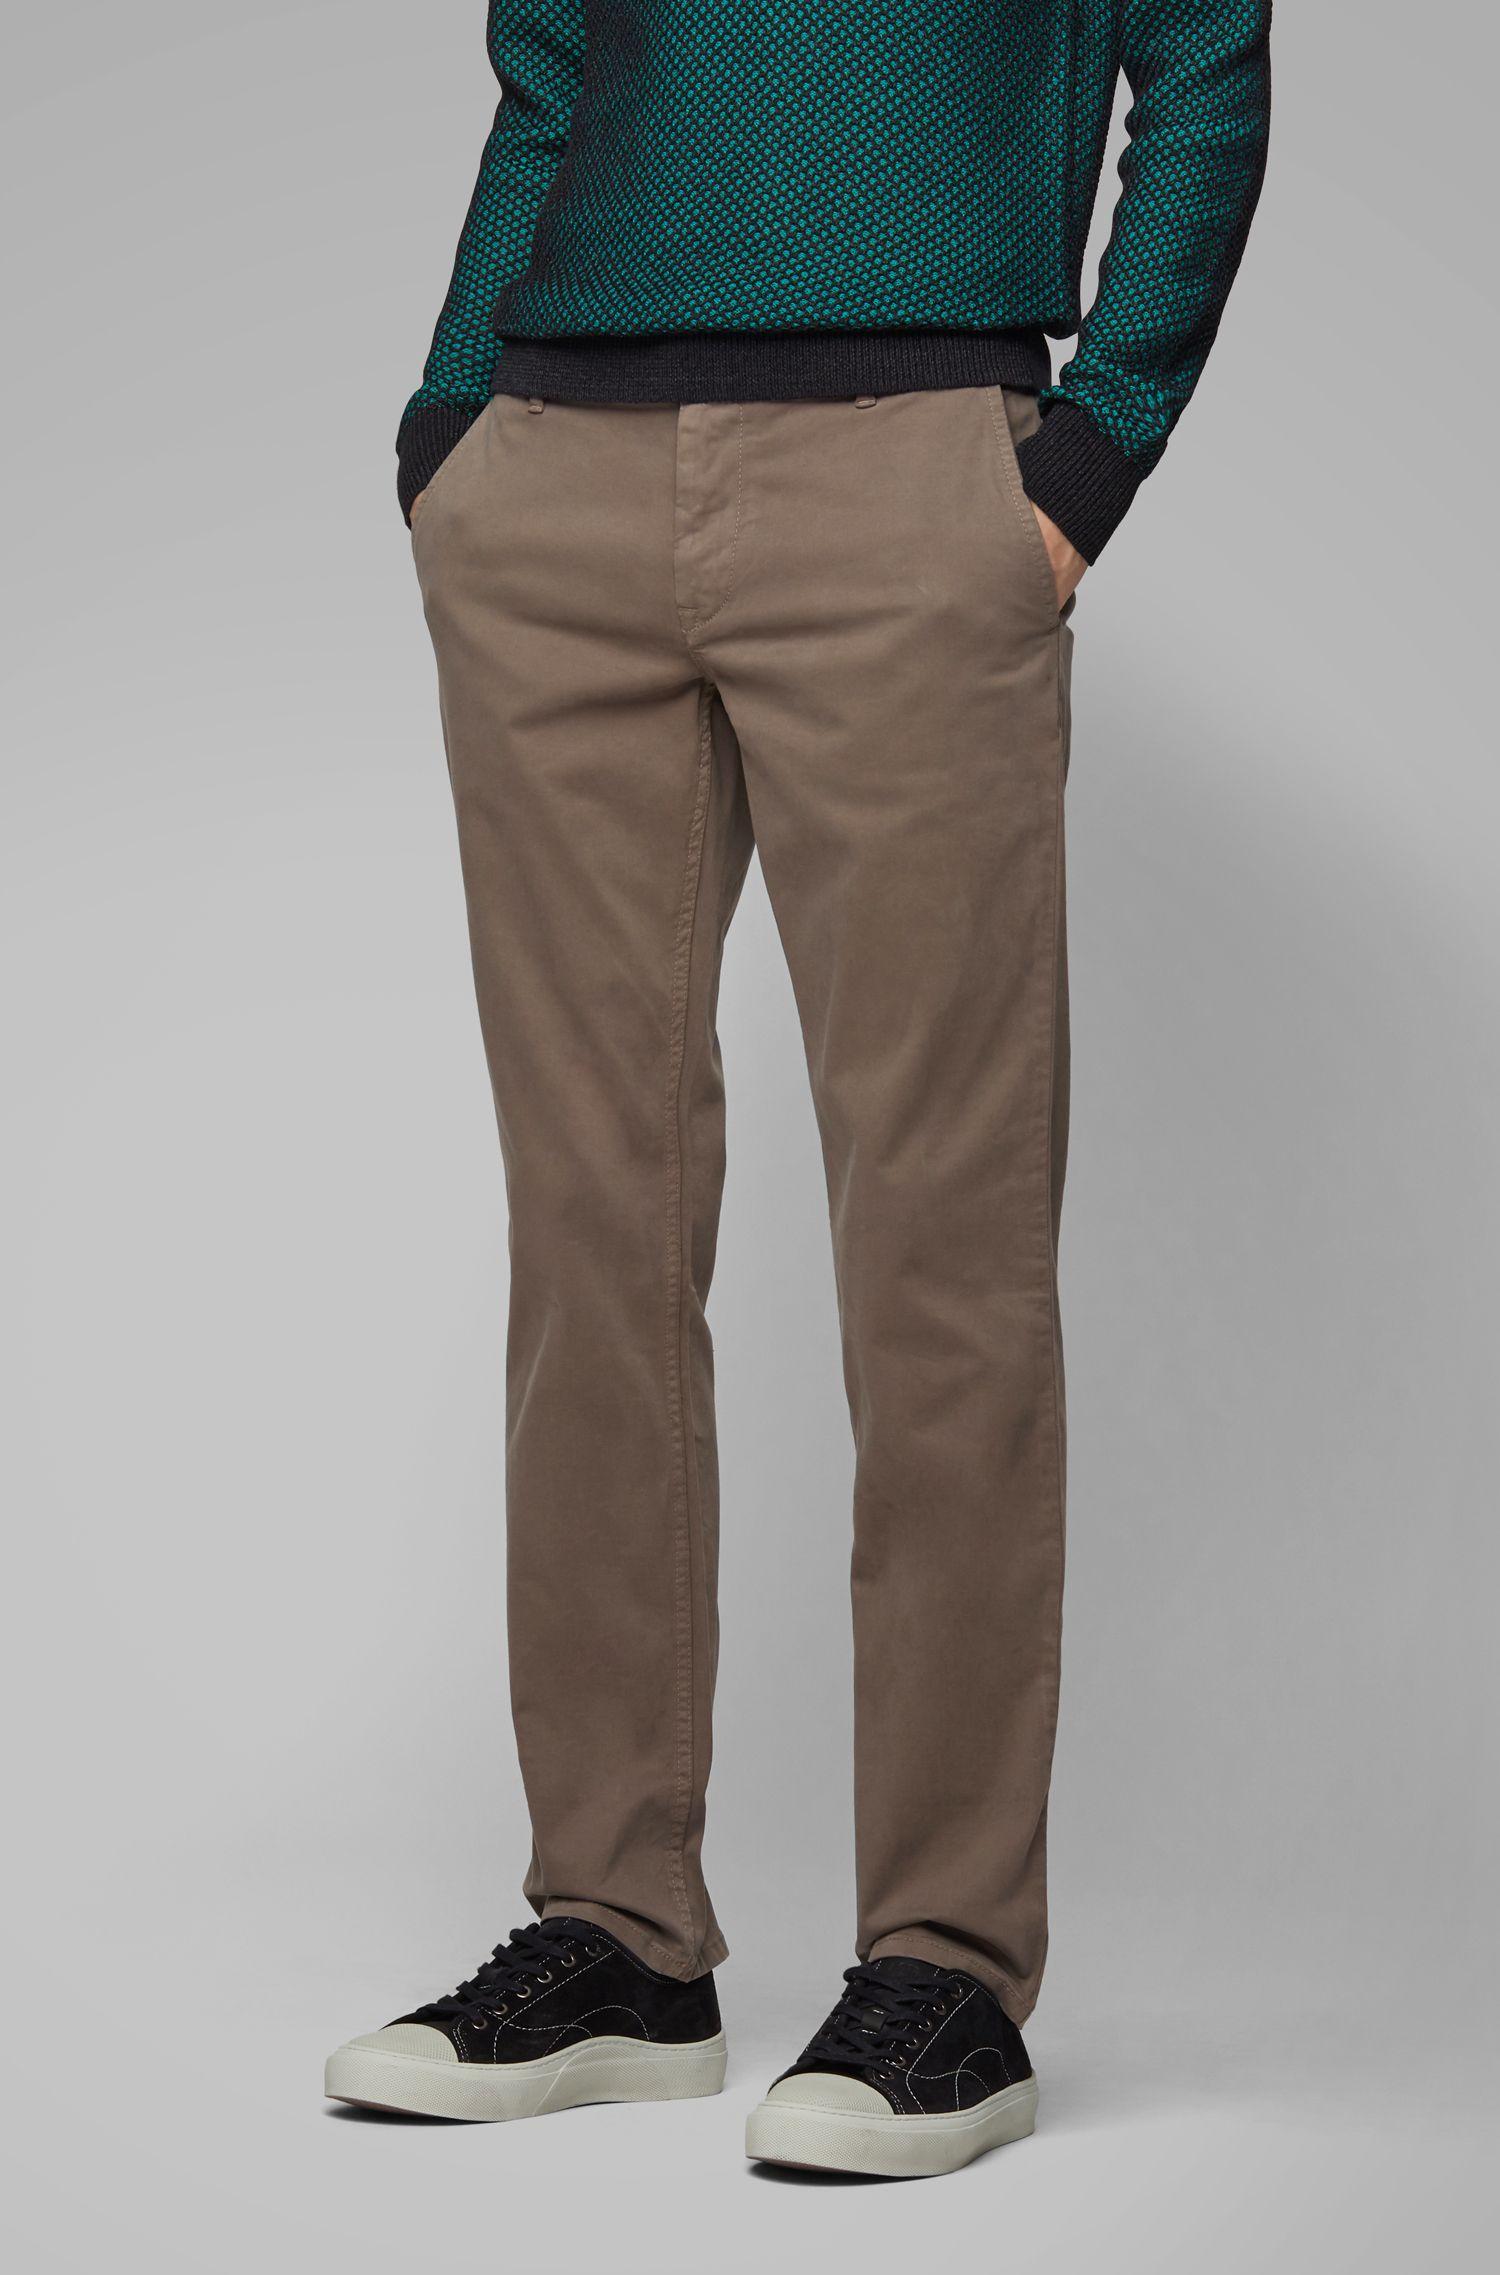 Hugo Boss Regular-fit casual chinos in brushed stretch cotton  RRP £89